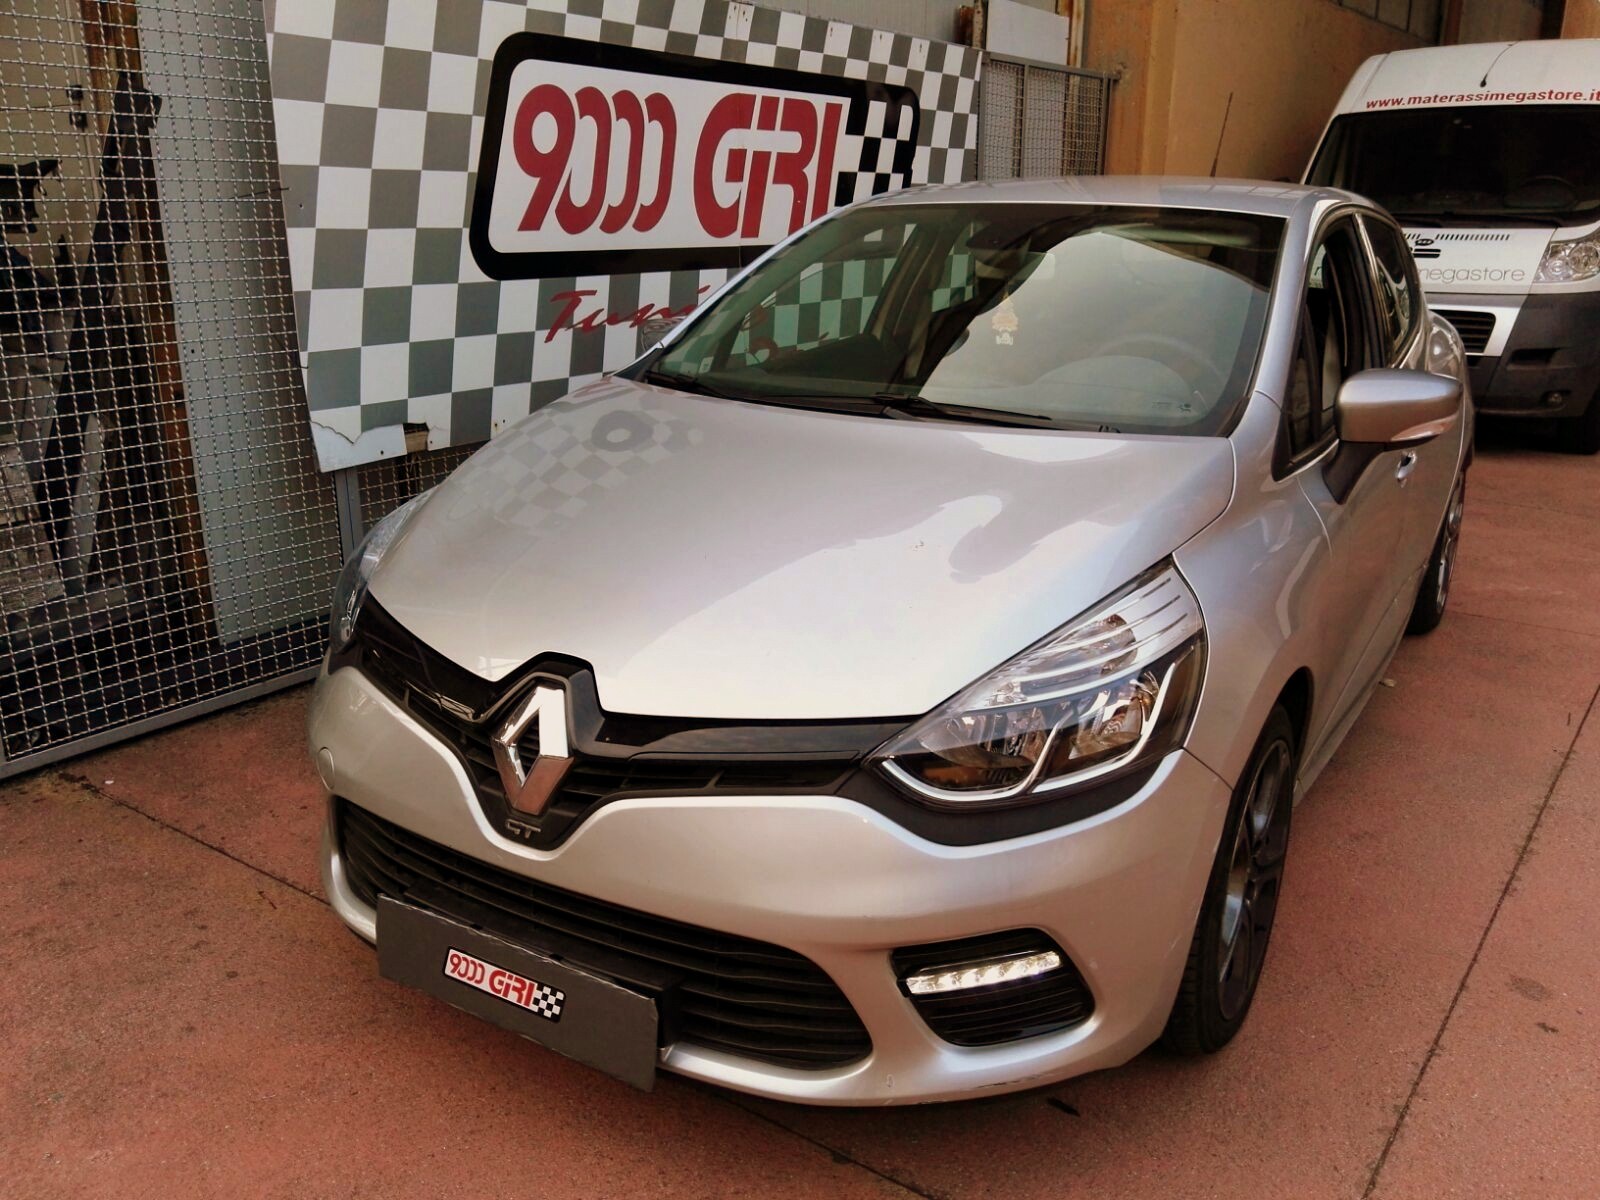 renault-clio-gt-powered-by-9000-giri-7